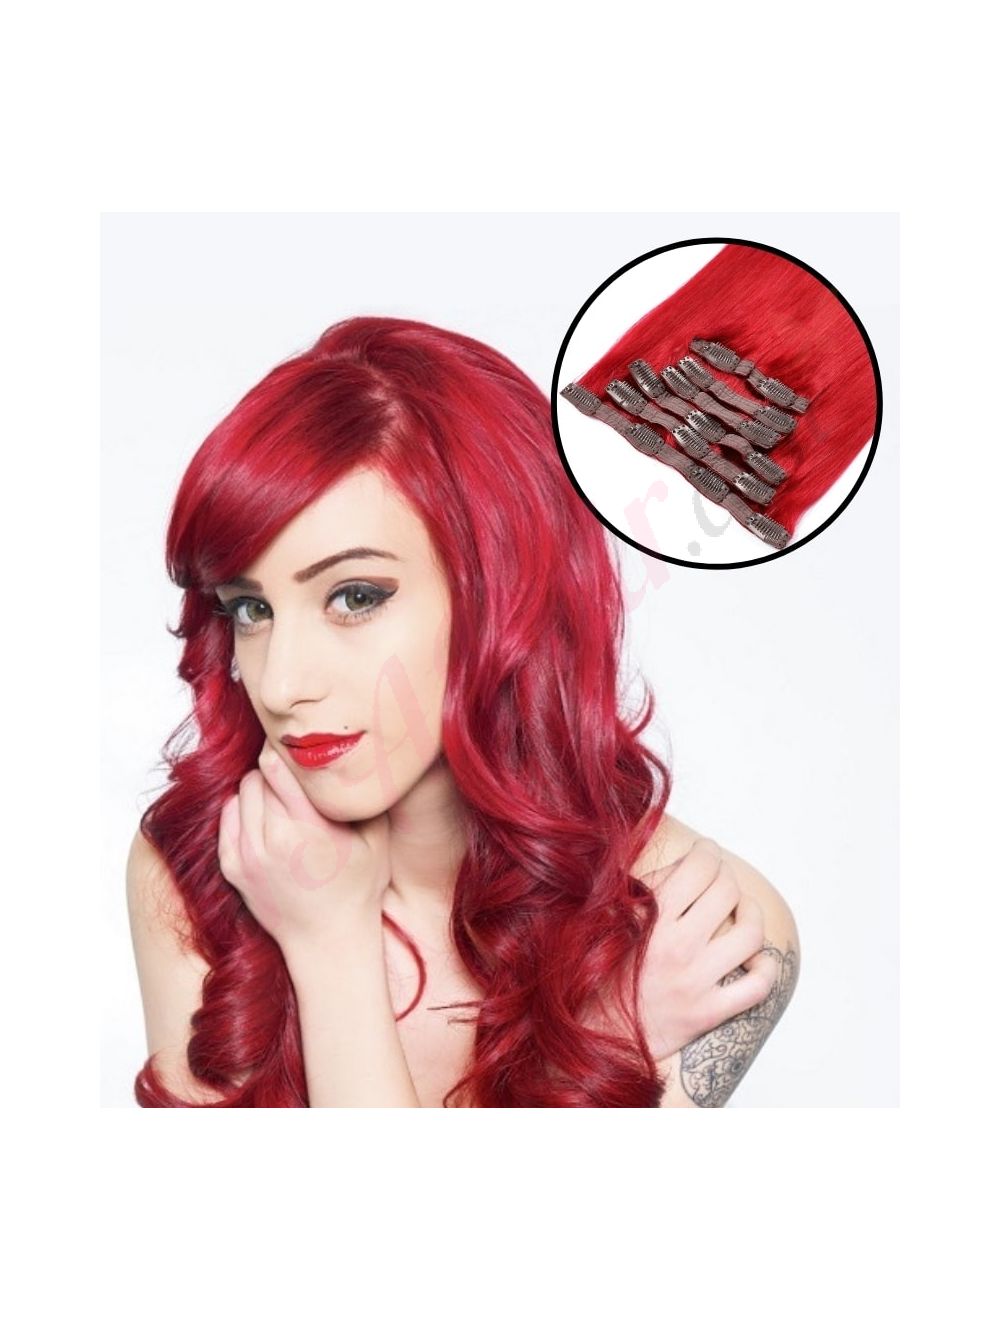 Red CLIP IN hair extensions 100% real hair (human hair)